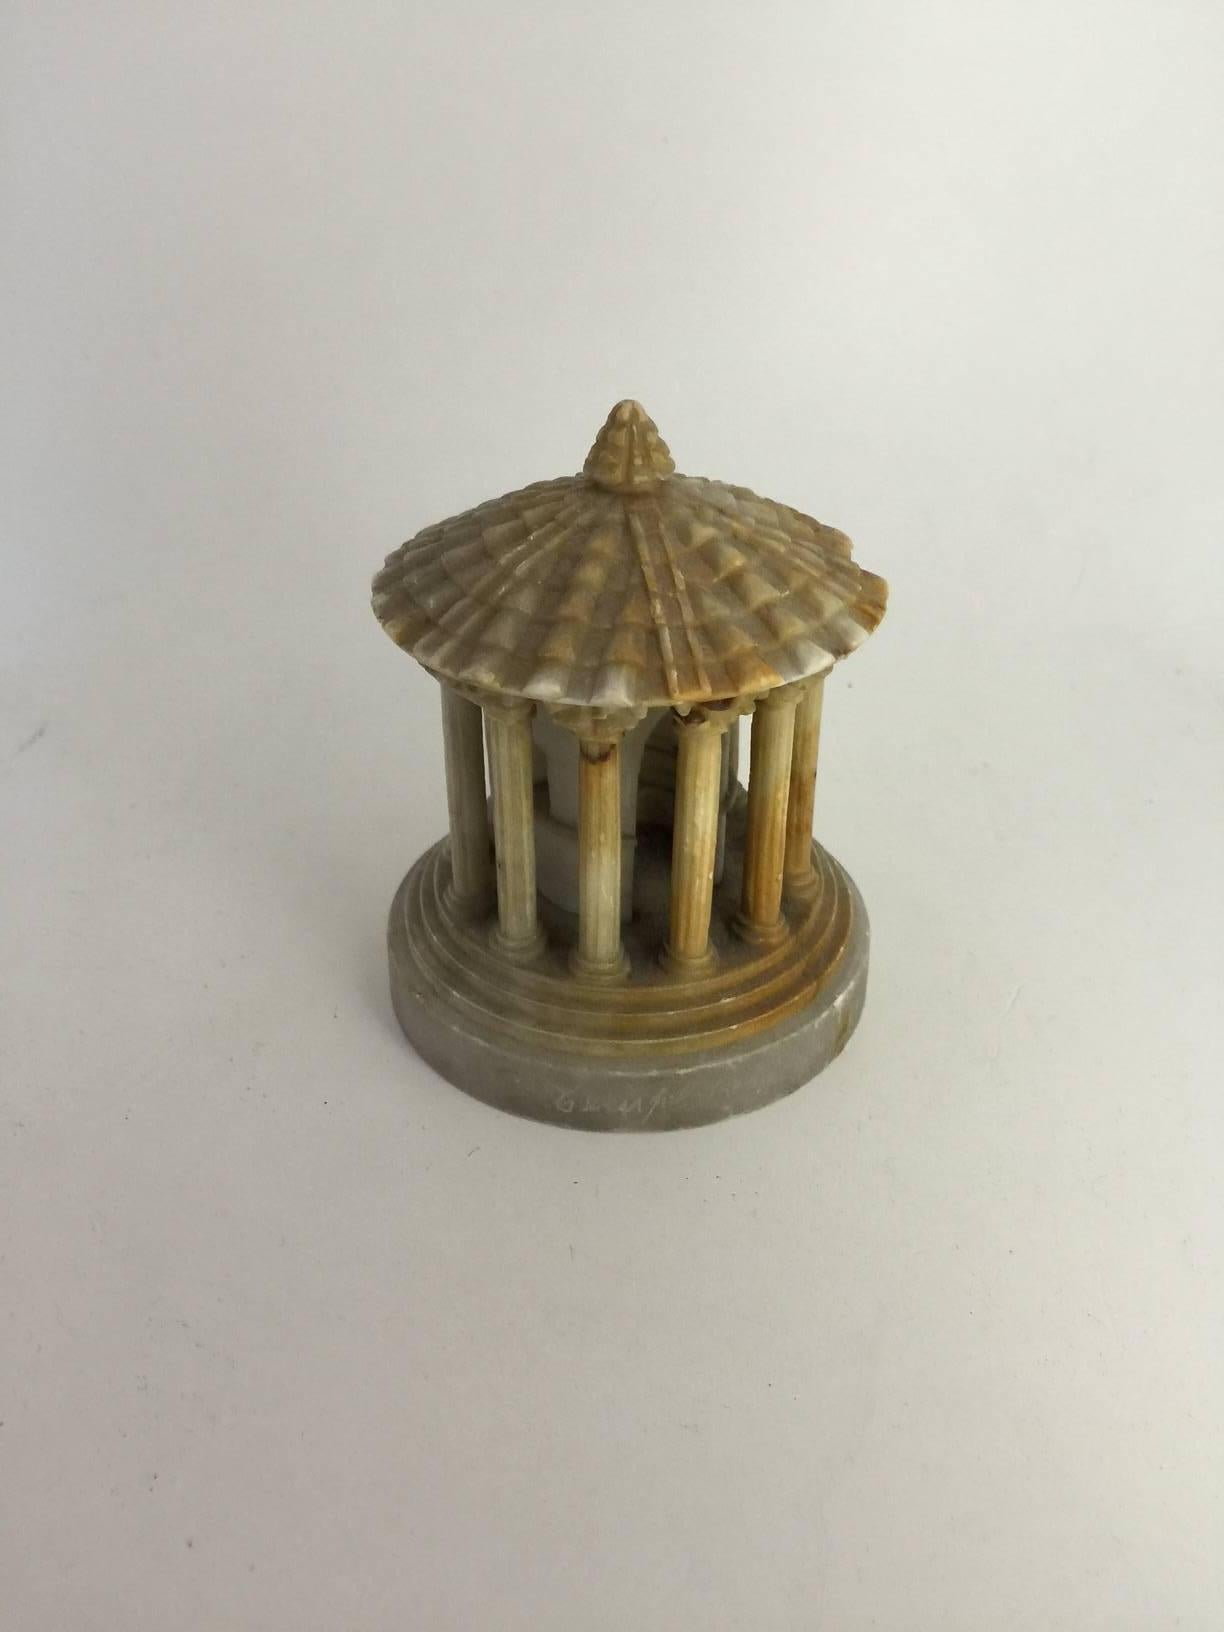 The diminutive alabaster model with small chip to roof.